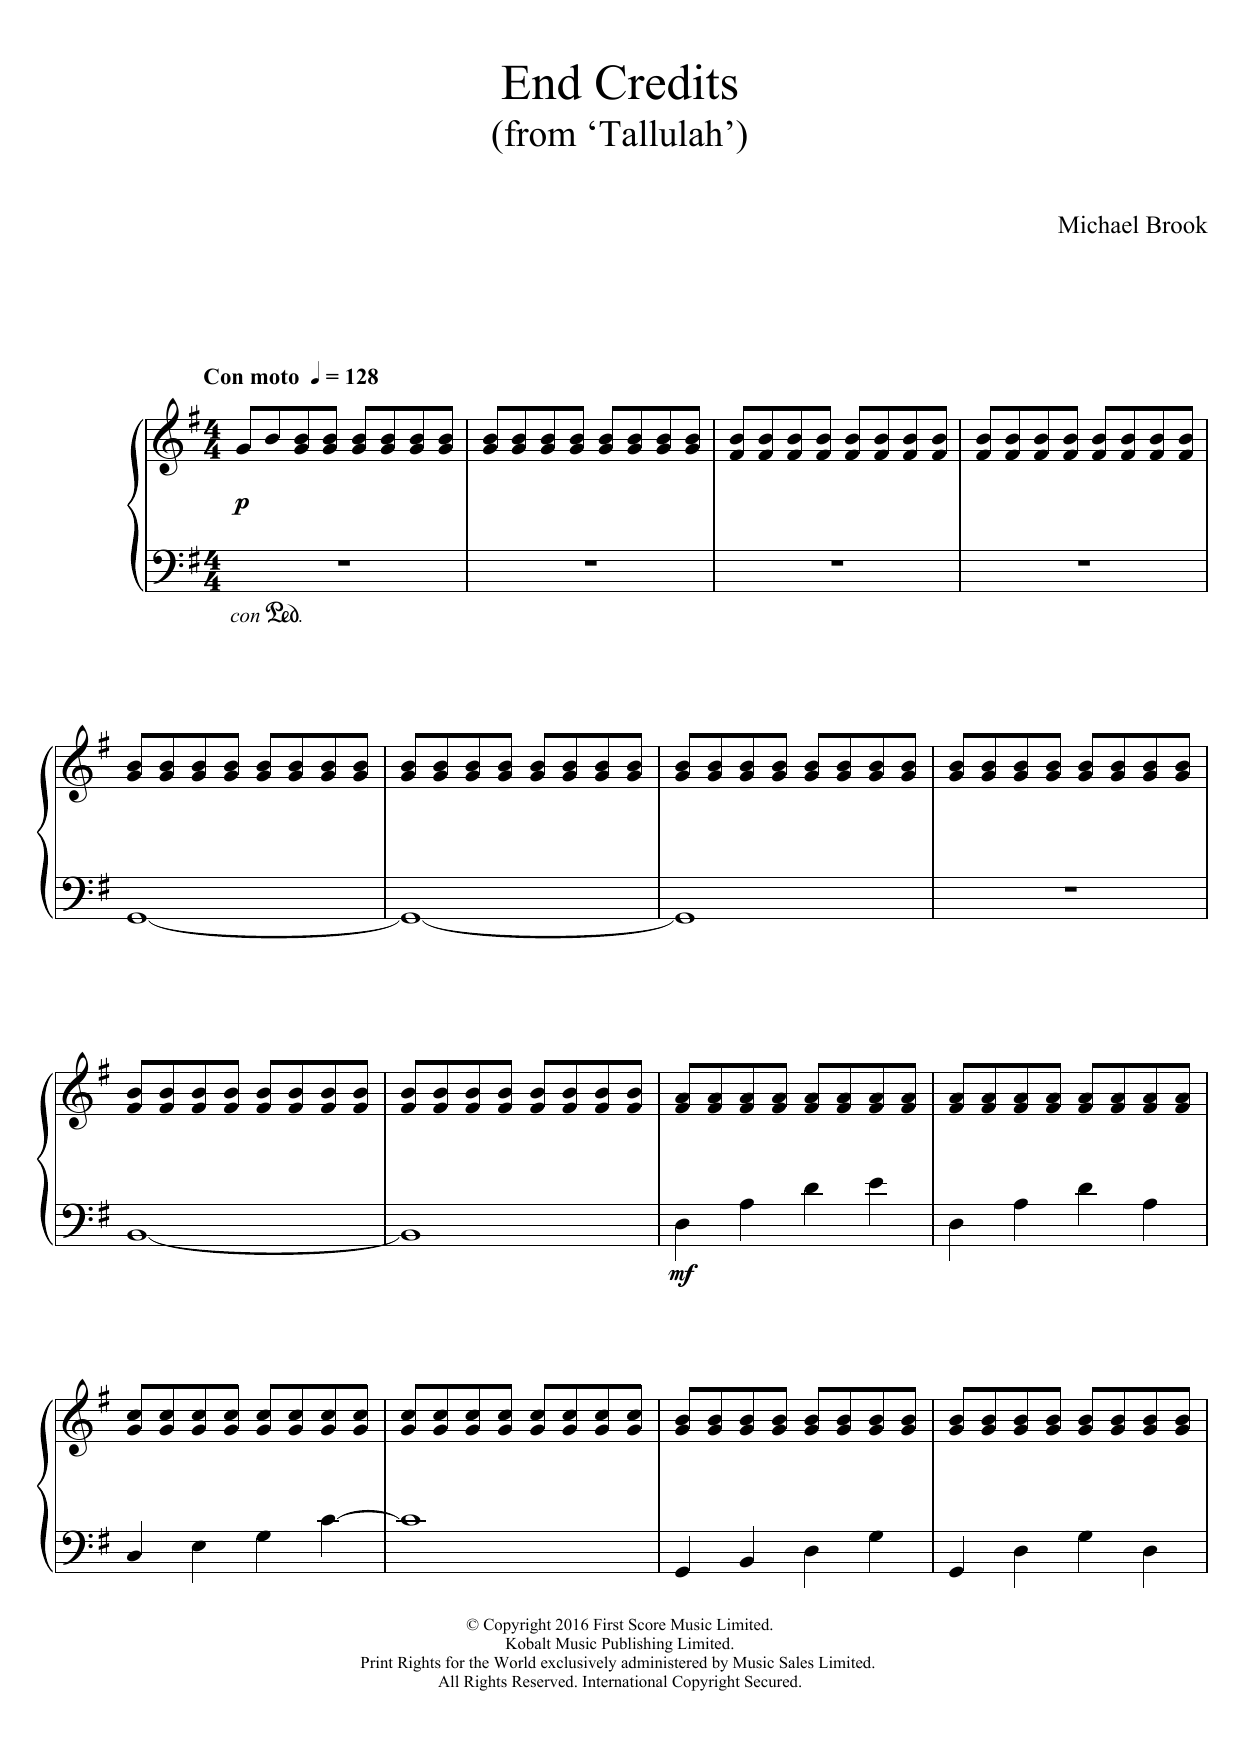 Download Michael Brook End Credits (from 'Tallulah') Sheet Music